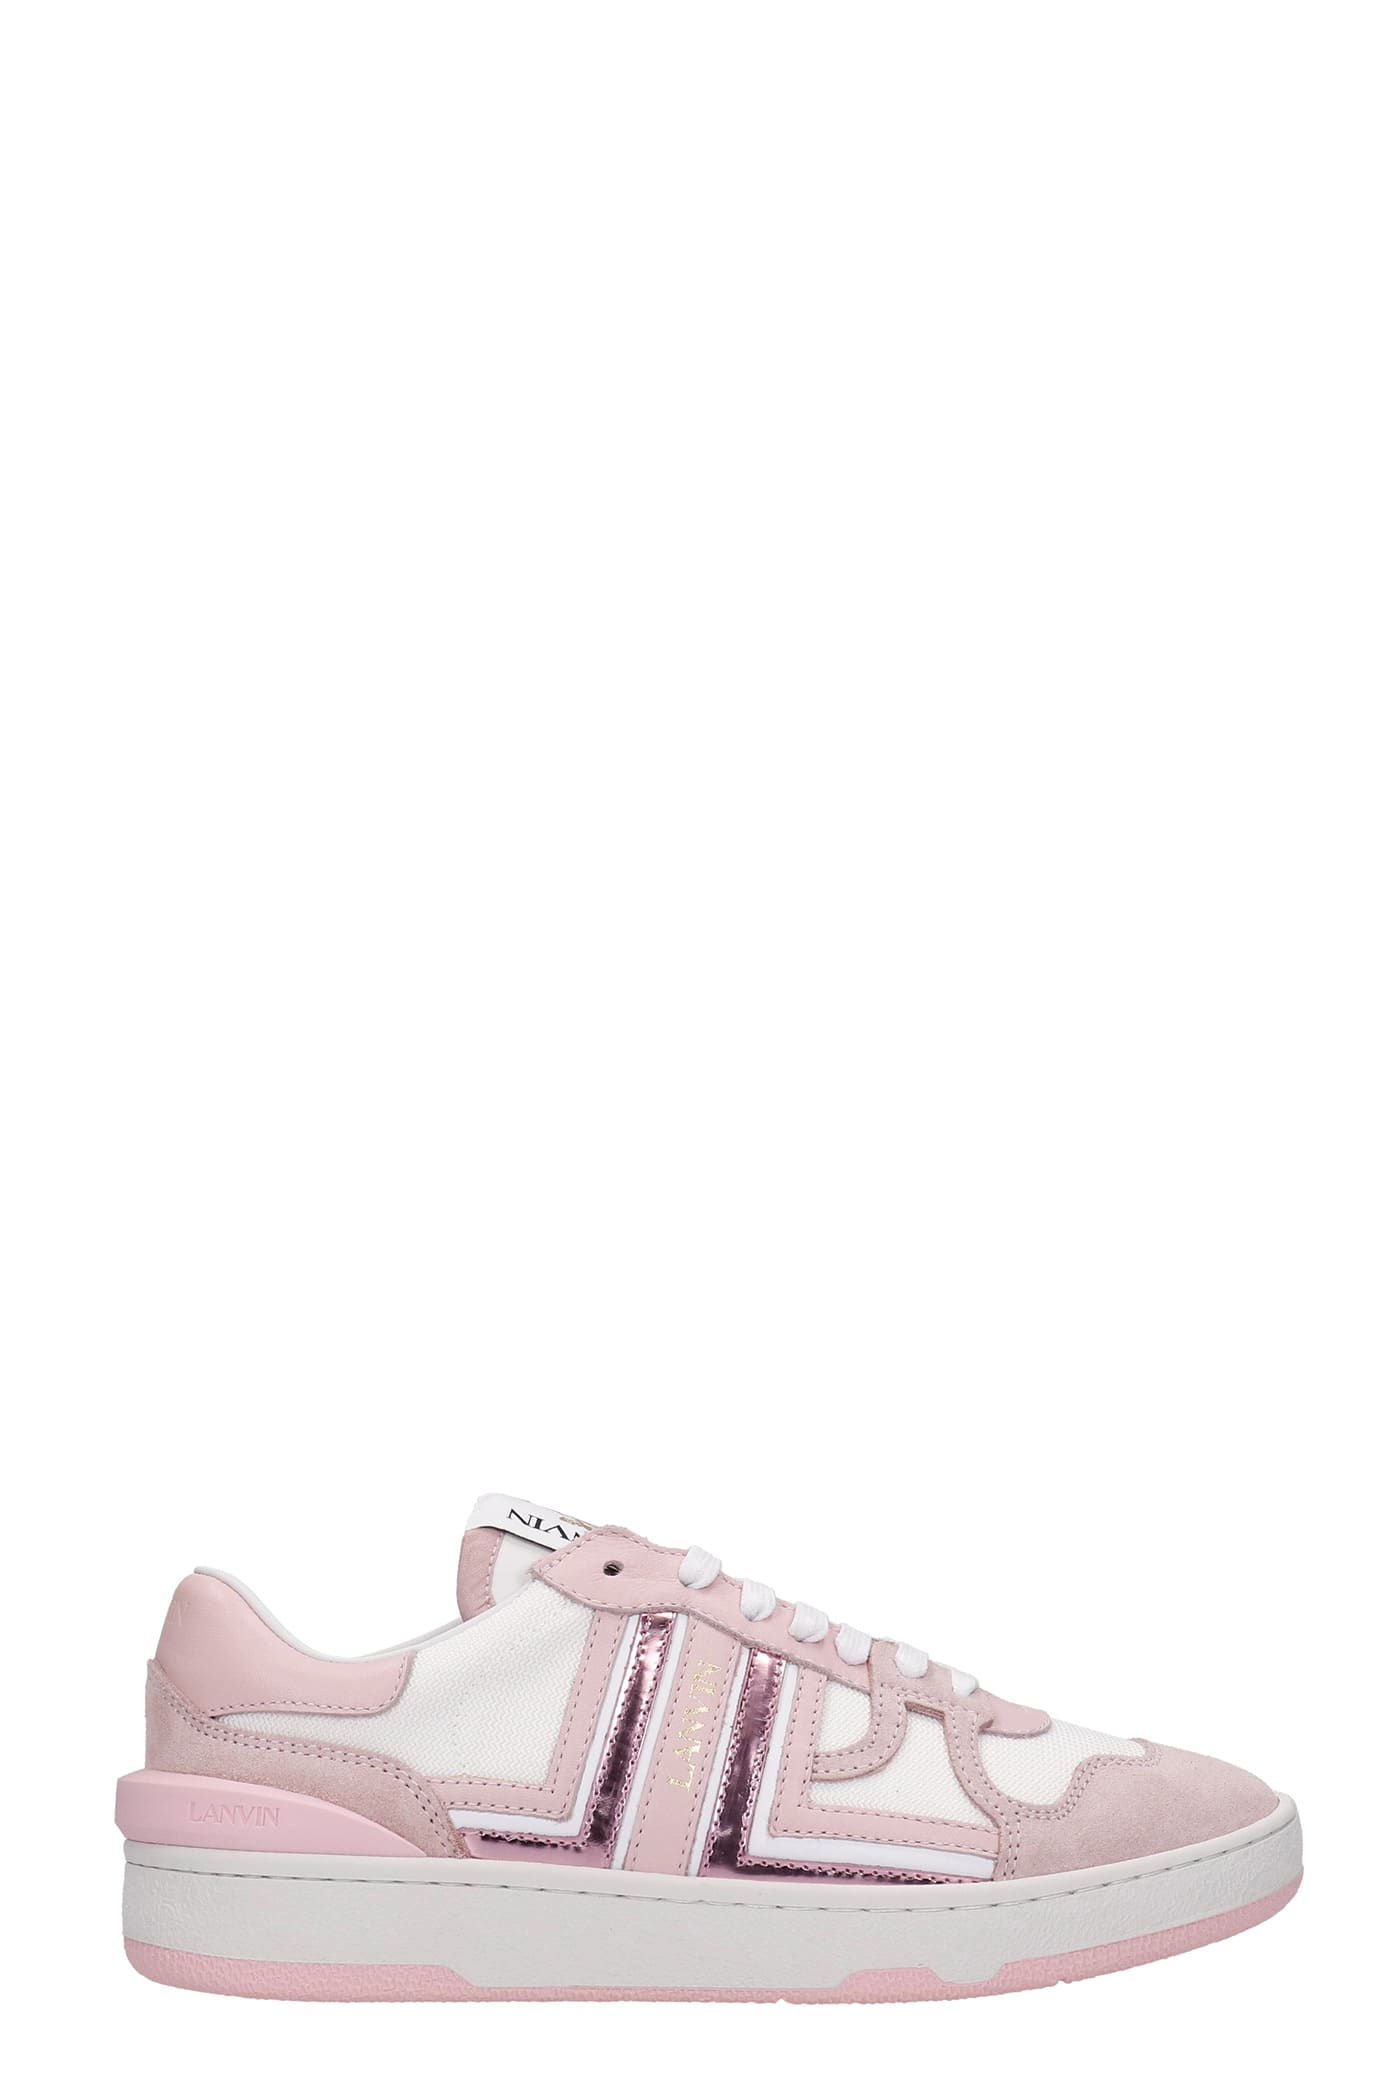 Lanvin Clay Sneakers In Rose-pink Leather